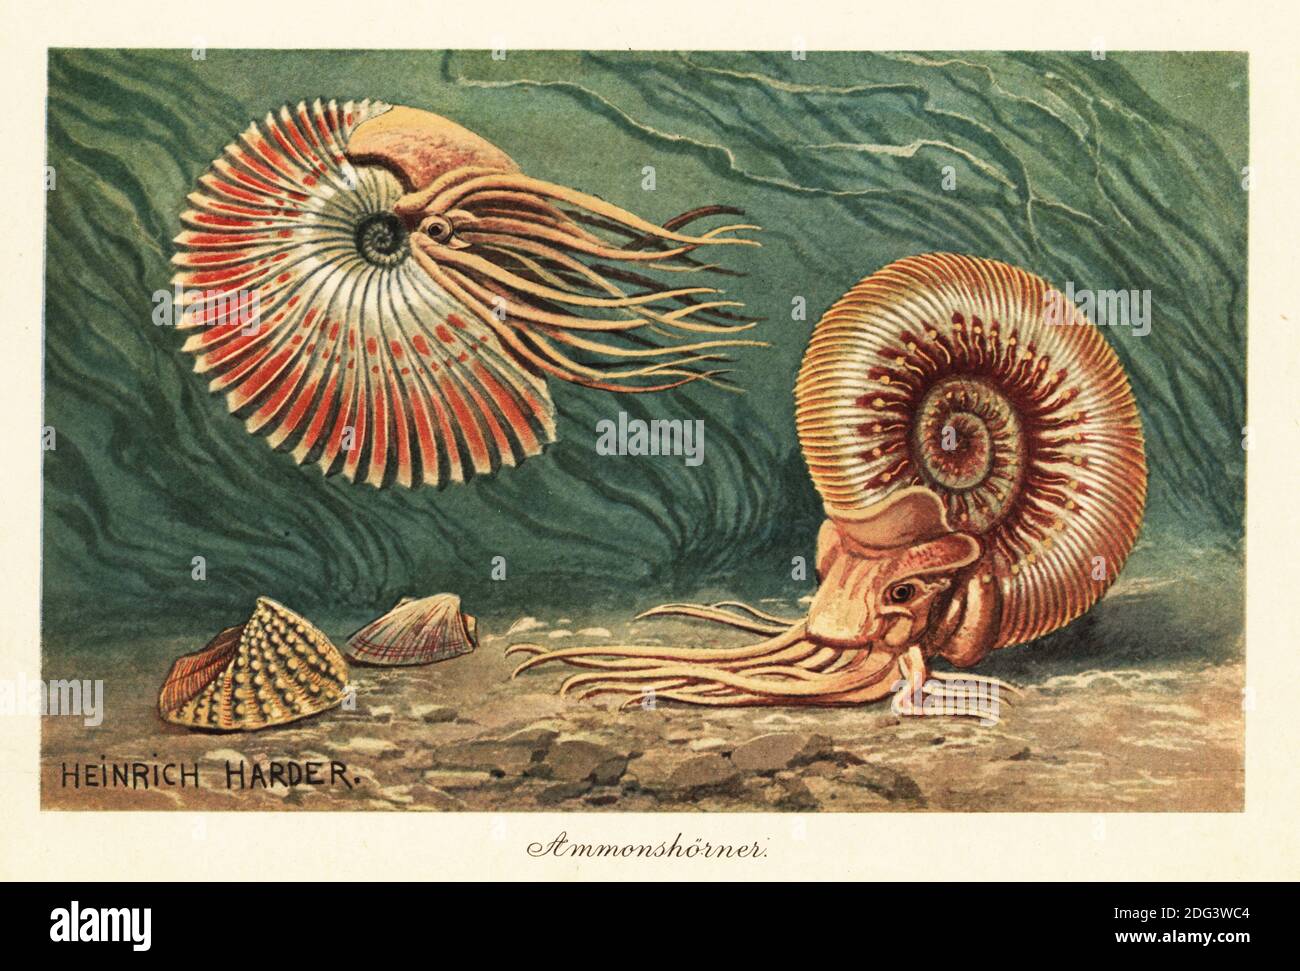 Extinct ammonites swimming in the ocean. Ammonoids, group of extinct marine mollusc animals in the subclass Ammonoidea of the class Cephalopoda. Ammonshorner. Colour printed illustration by Heinrich Harder from Wilhelm Bolsche’s Tiere der Urwelt (Animals of the Prehistoric World), Reichardt Cocoa company, Hamburg, 1908. Heinrich Harder (1858-1935) was a German landscape artist and book illustrator. Stock Photo